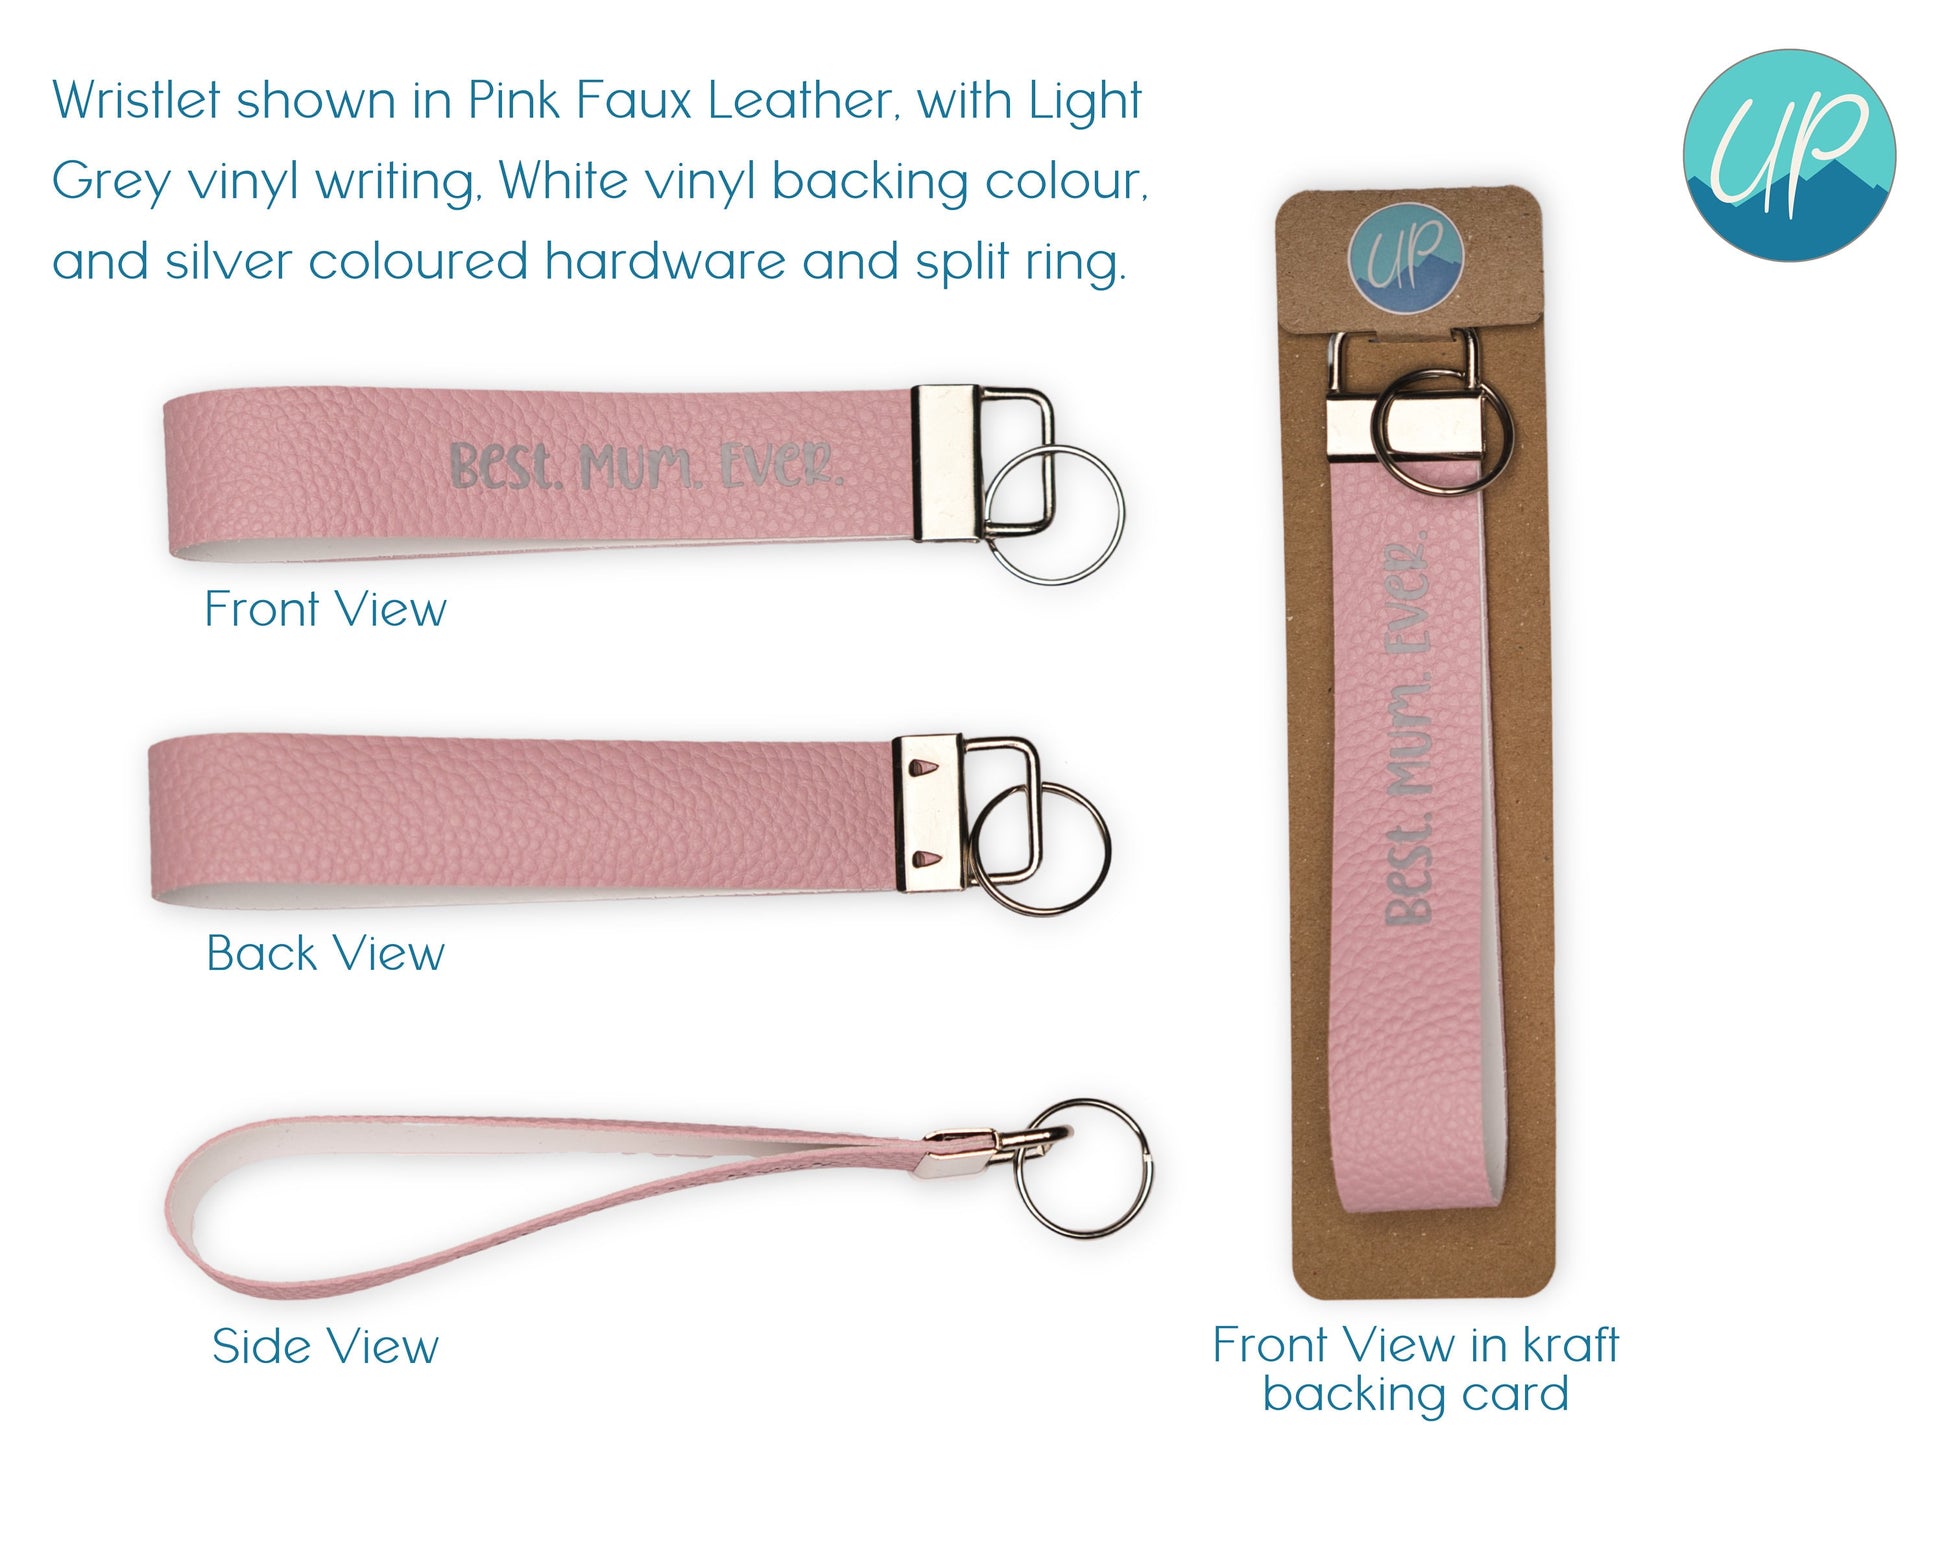 Personalised Best Mum Ever Faux Leather Wristlet Keyring, Handmade Custom Pastel Keychain, Self Care Inspirational Quotes, Mother's Day Gift